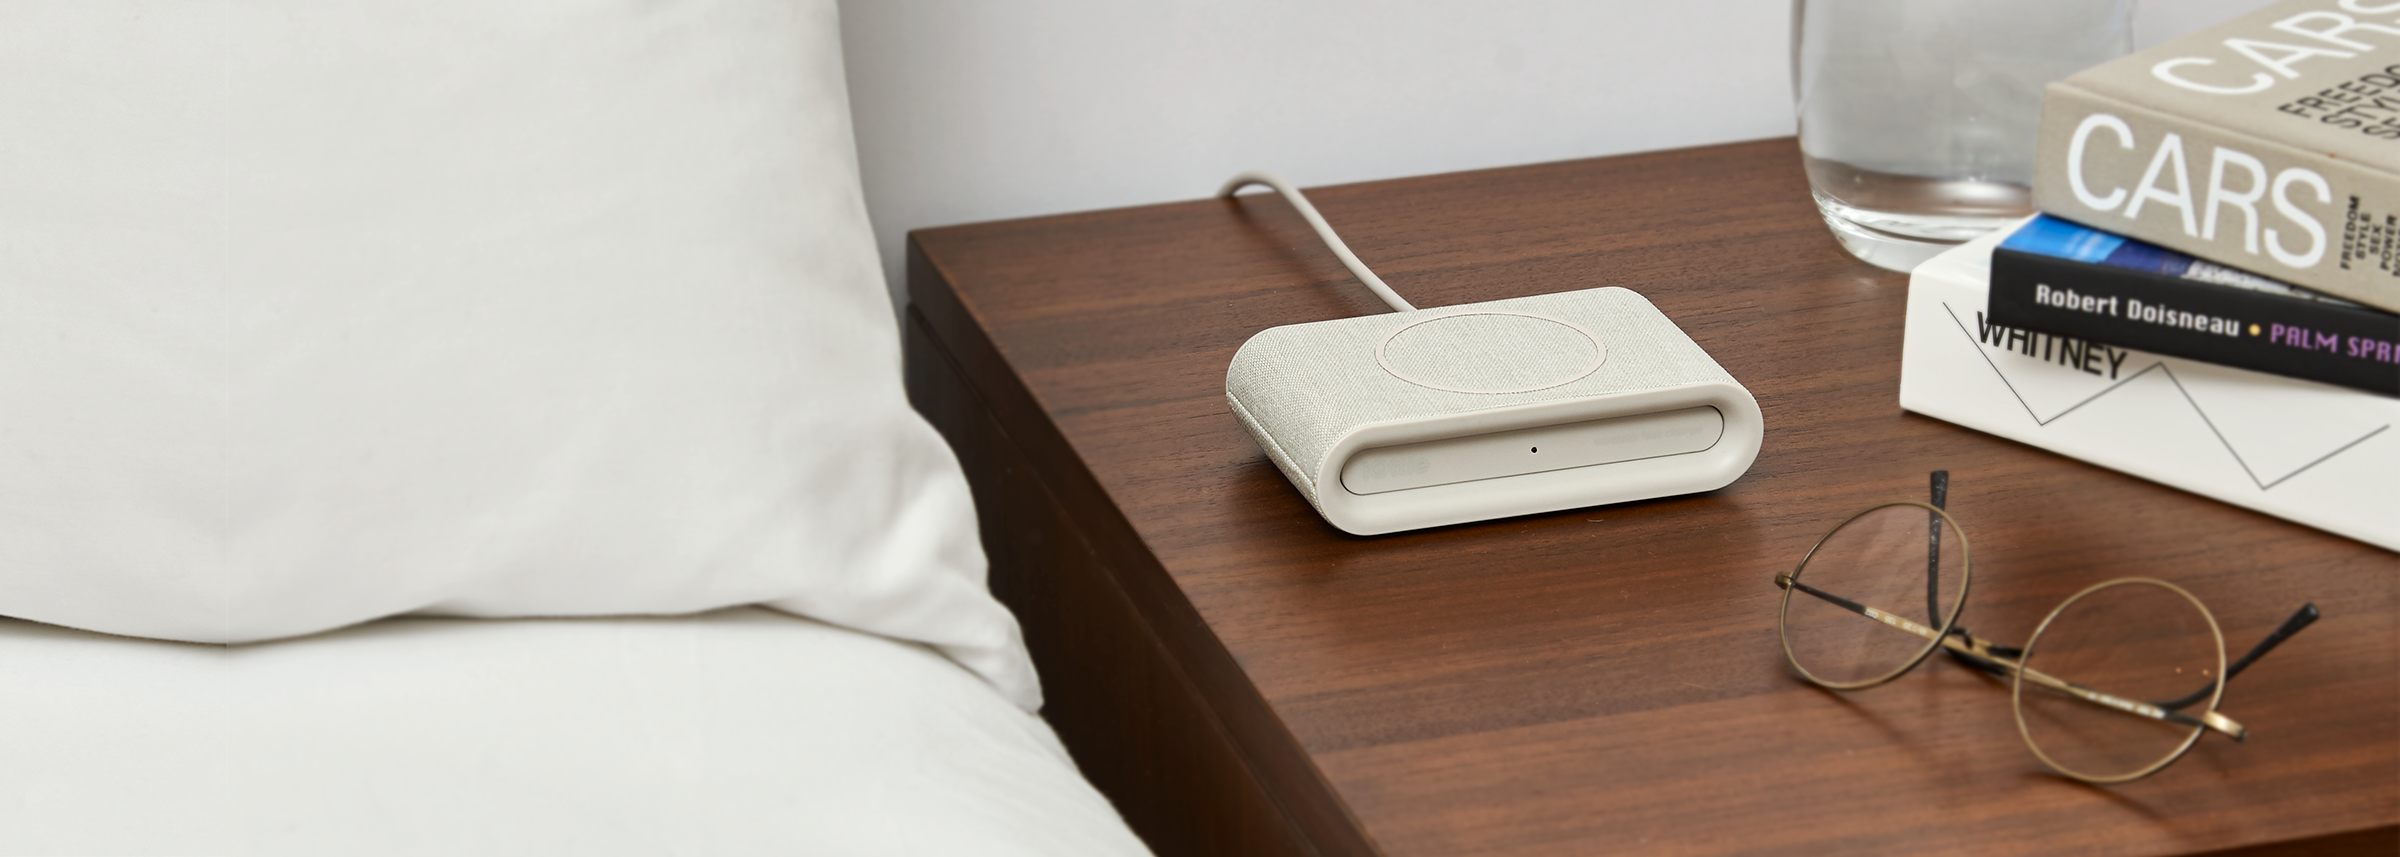 iON Wireless Plus Charging Pad in Ivory on Bedside Table